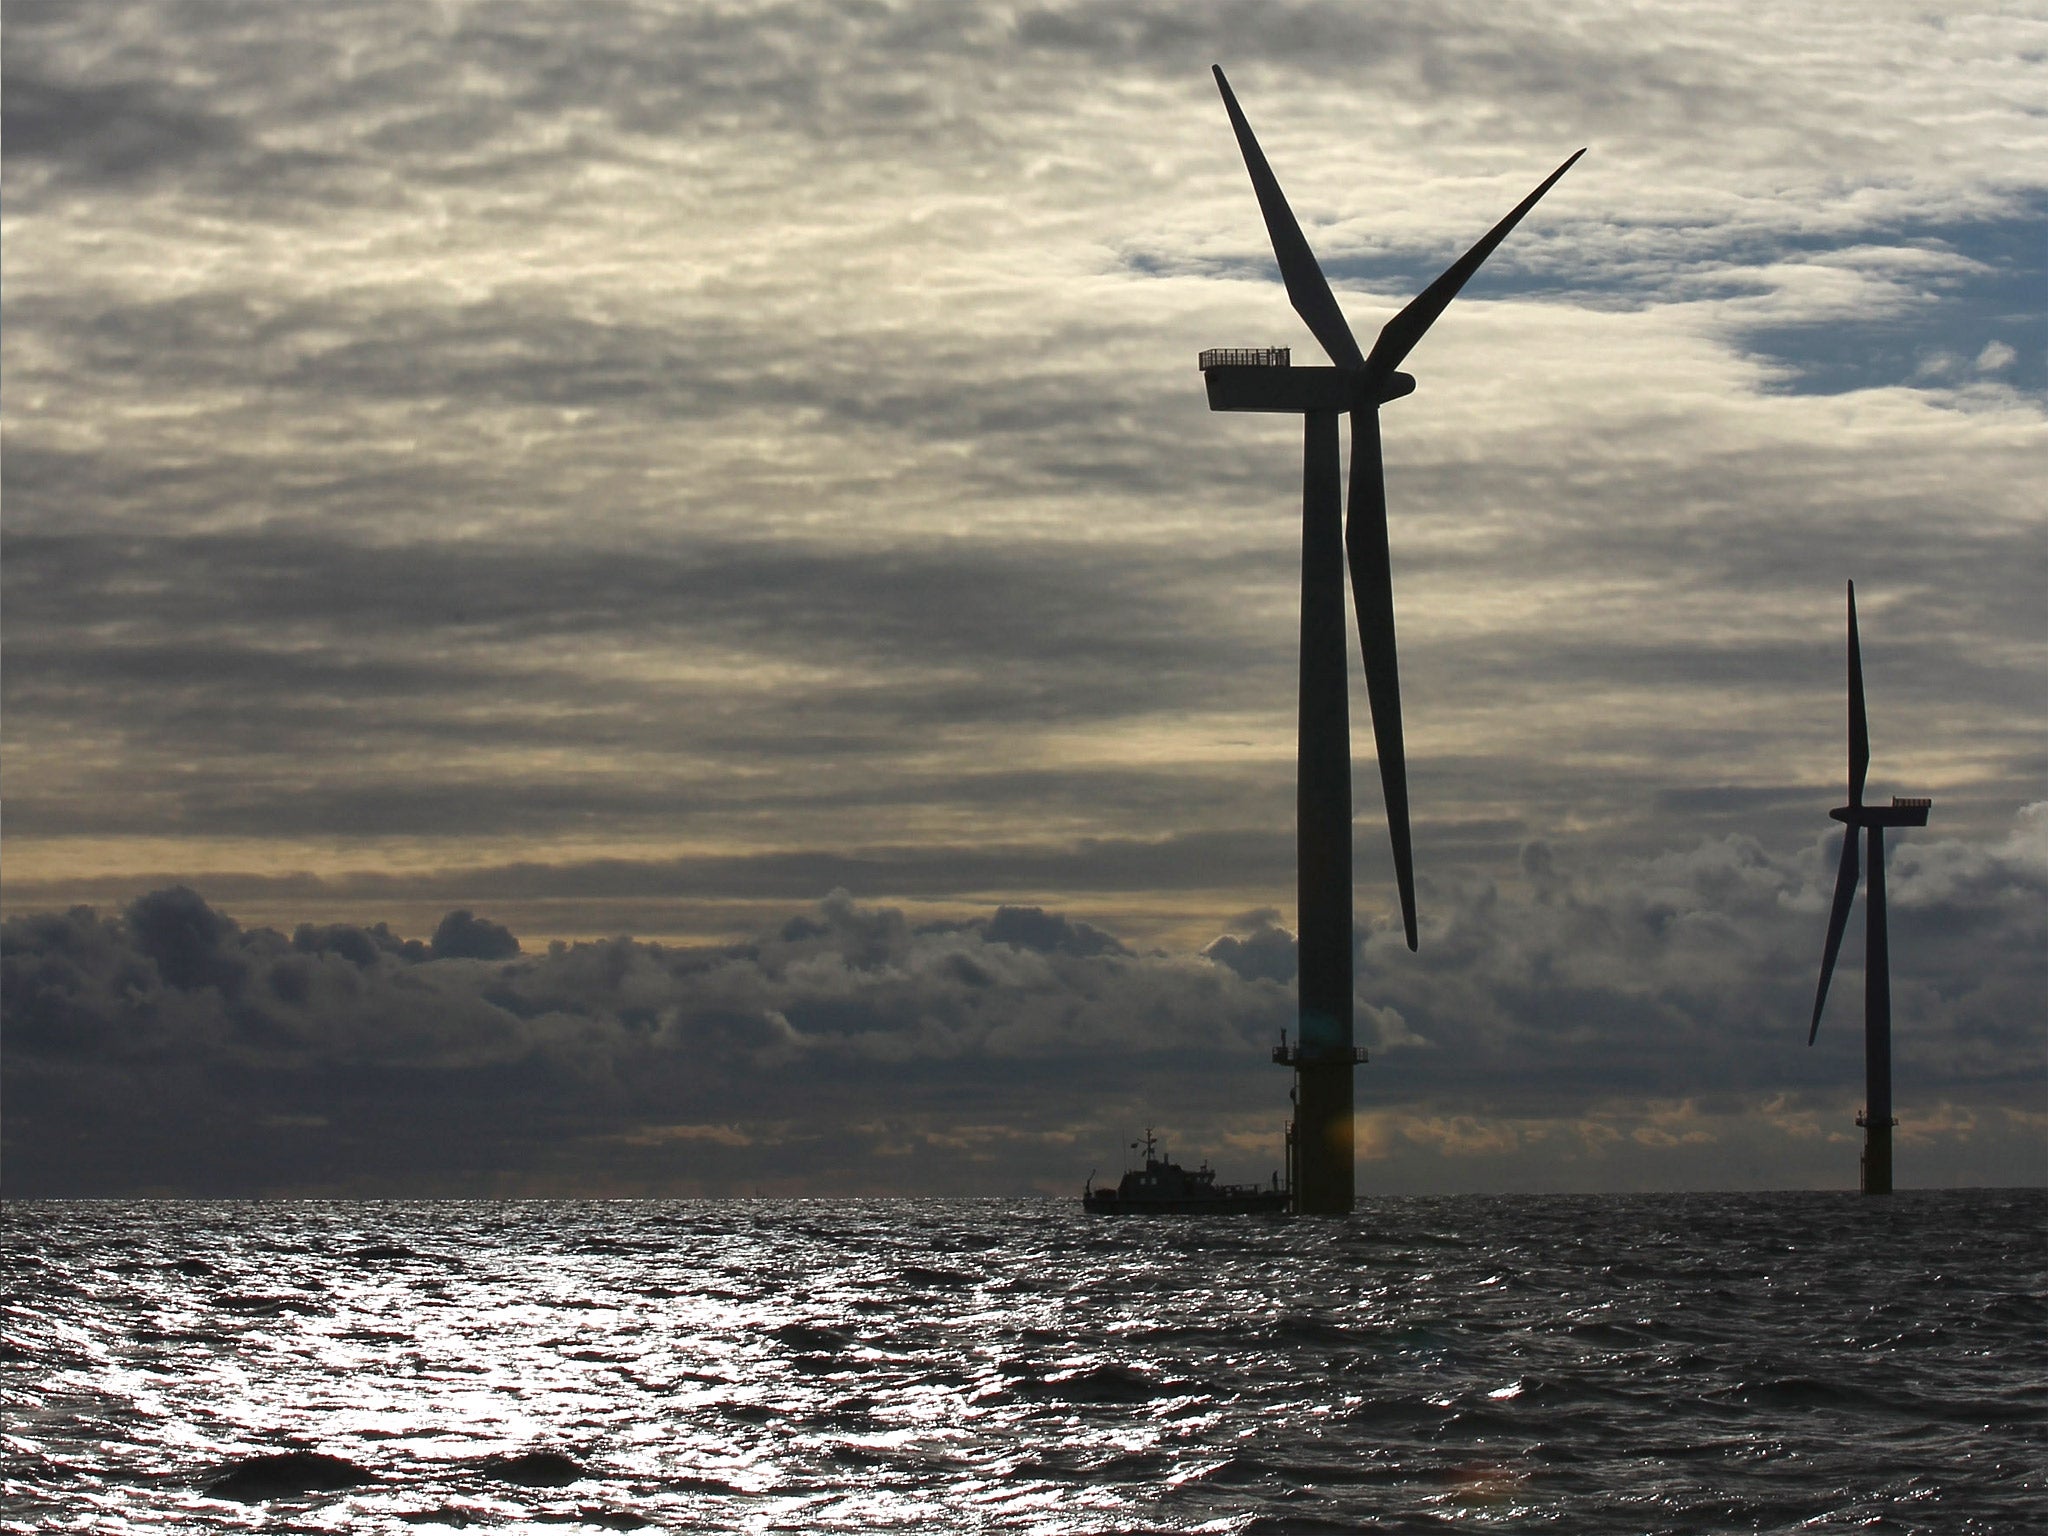 Institutional investors are being urged to back renewable energy projects like wind farms